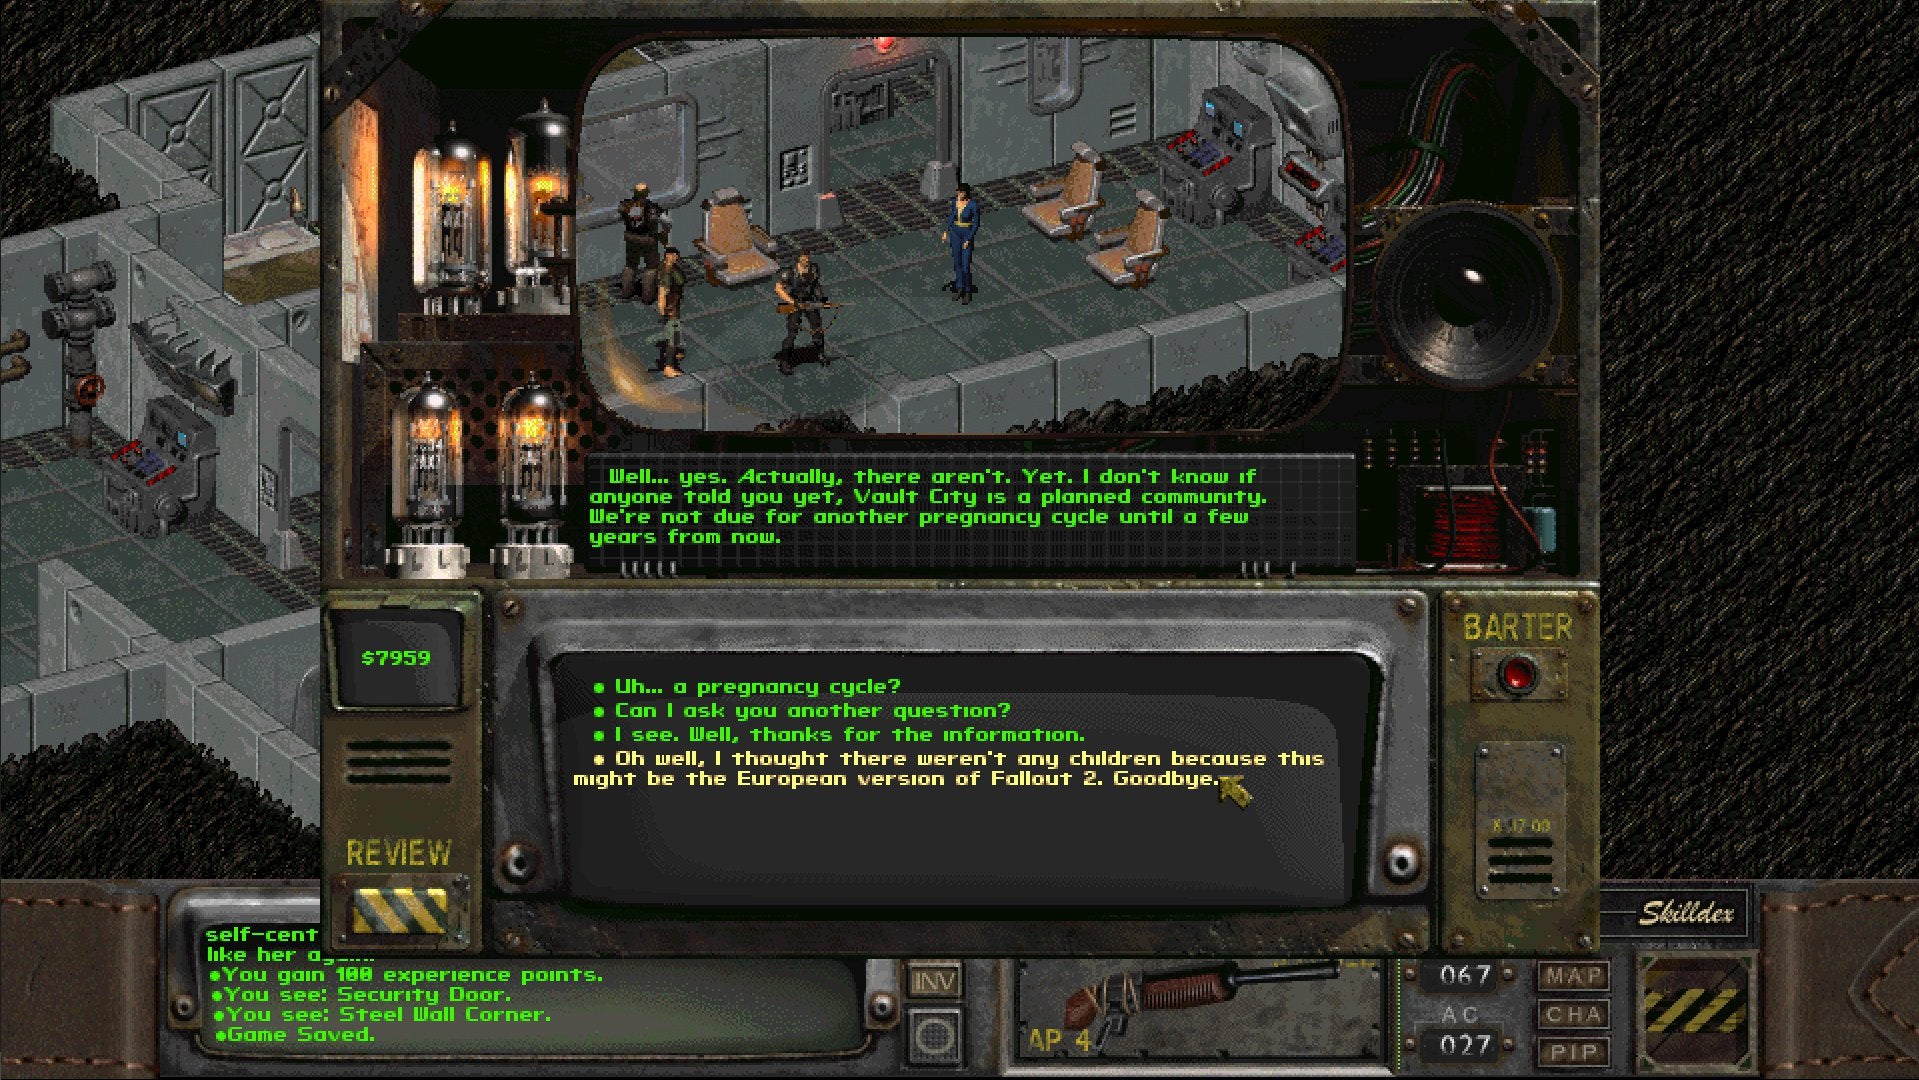 iconic video game dialogues  - Fallout 2: “Oh, well. I thought there weren’t any children because this might be the European version of Fallout 2.”